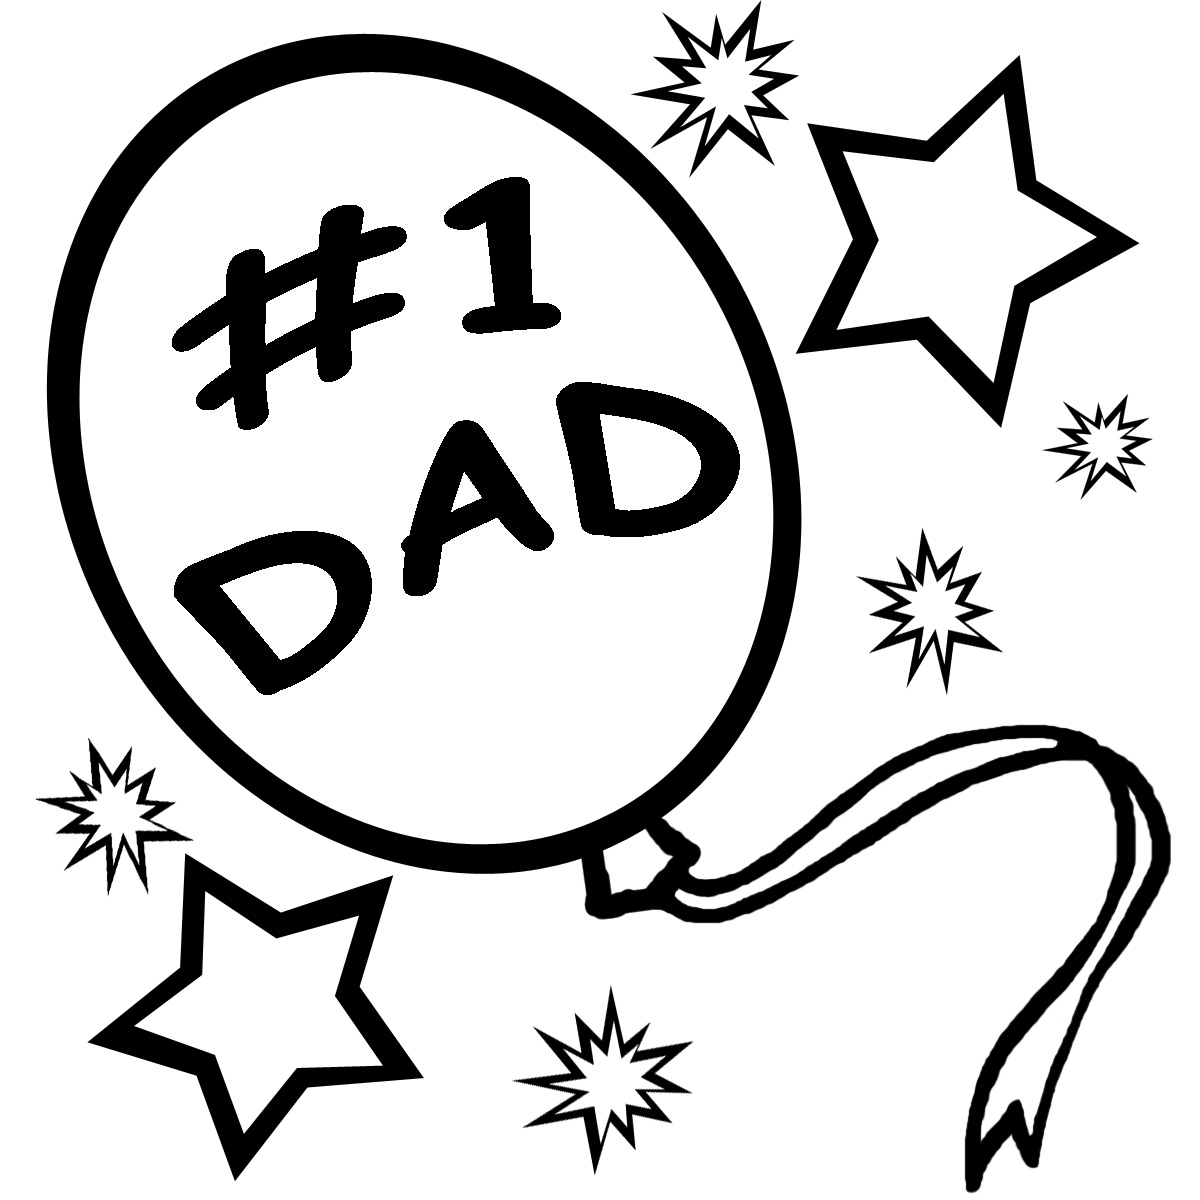 fathers-day-black-and-white-clipart-book-black-and-white-clipart